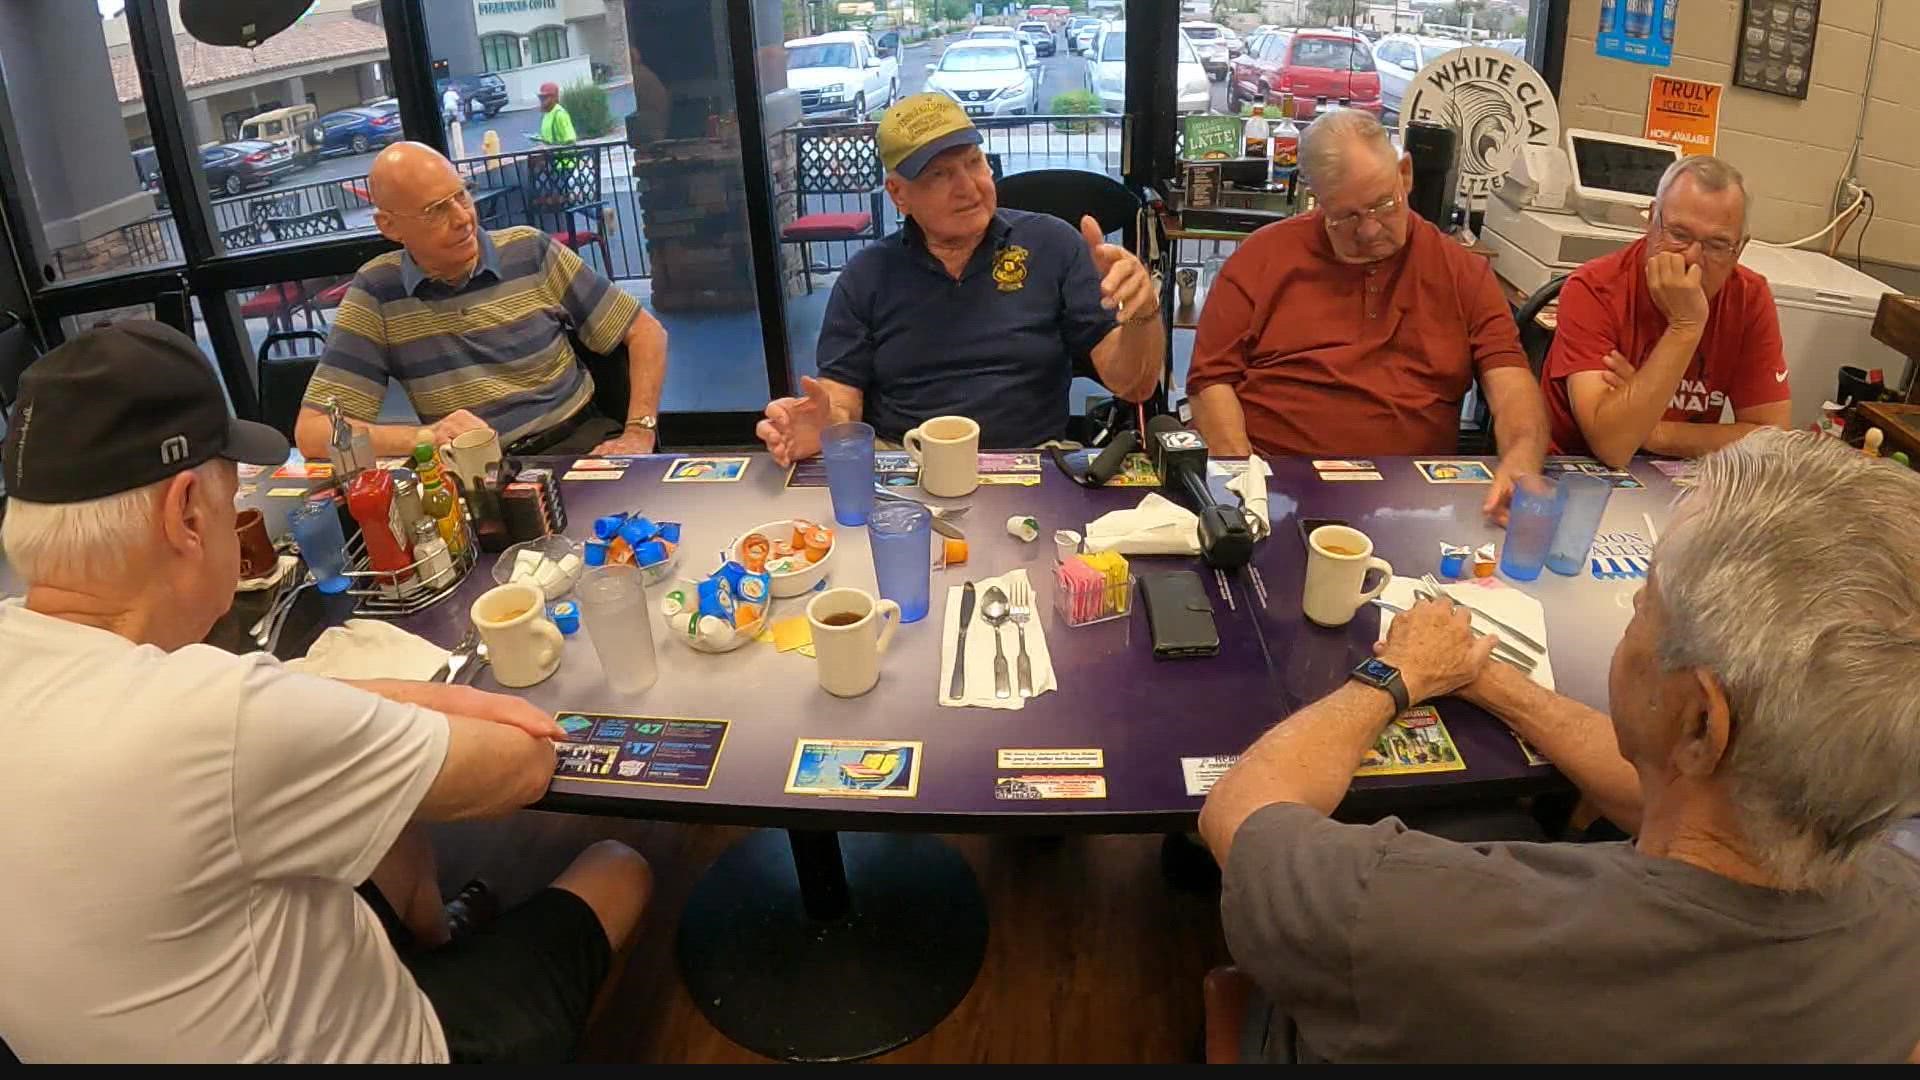 Wednesday's Republican gubernatorial debate devolved into an argumentative mess. Voters at the Moon Valley diner weighed in on what matters to them.